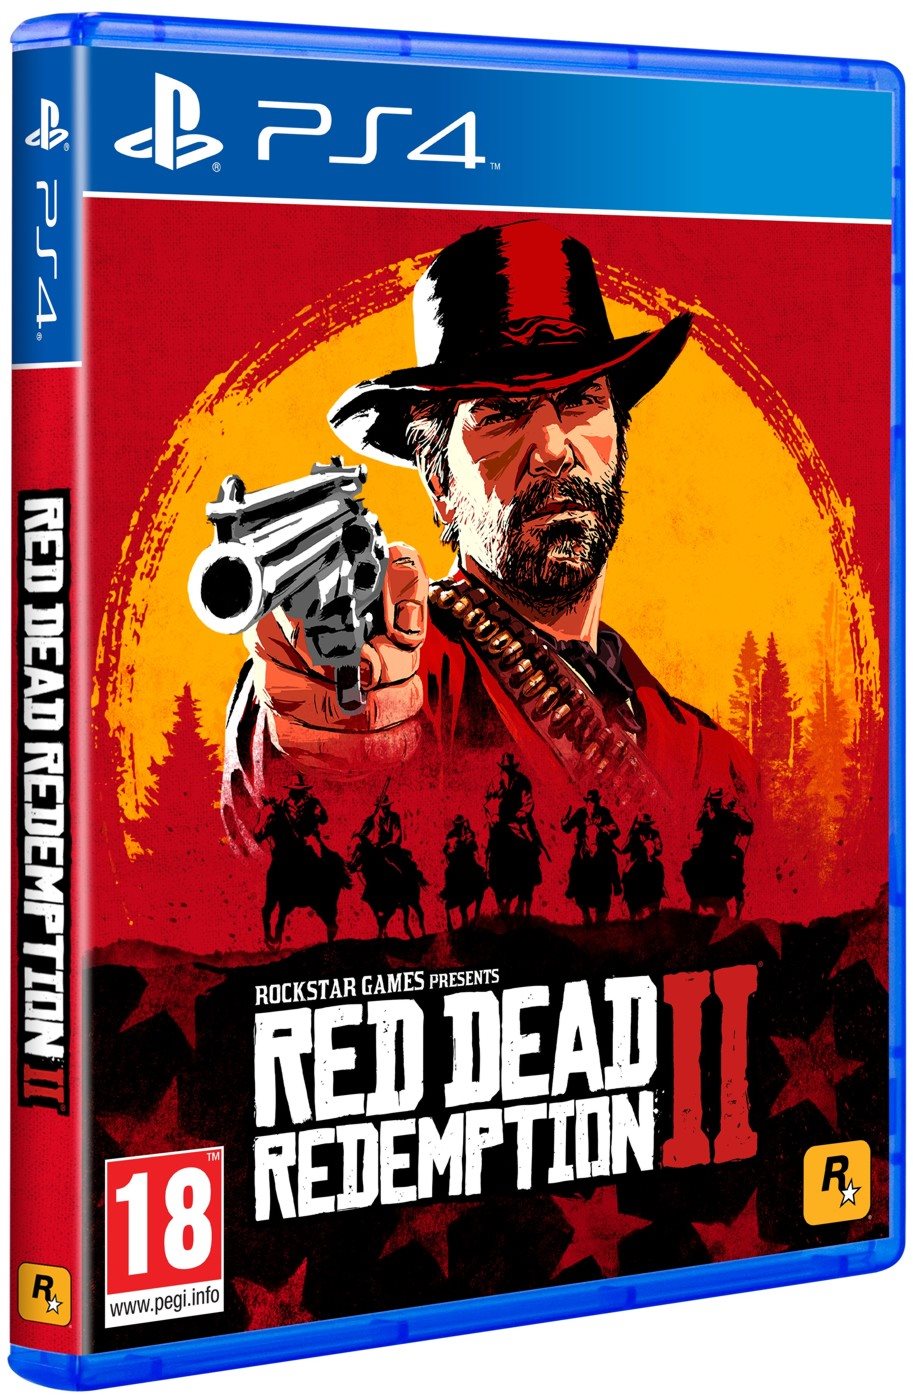 PS4 - Red Dead Redemption 20 